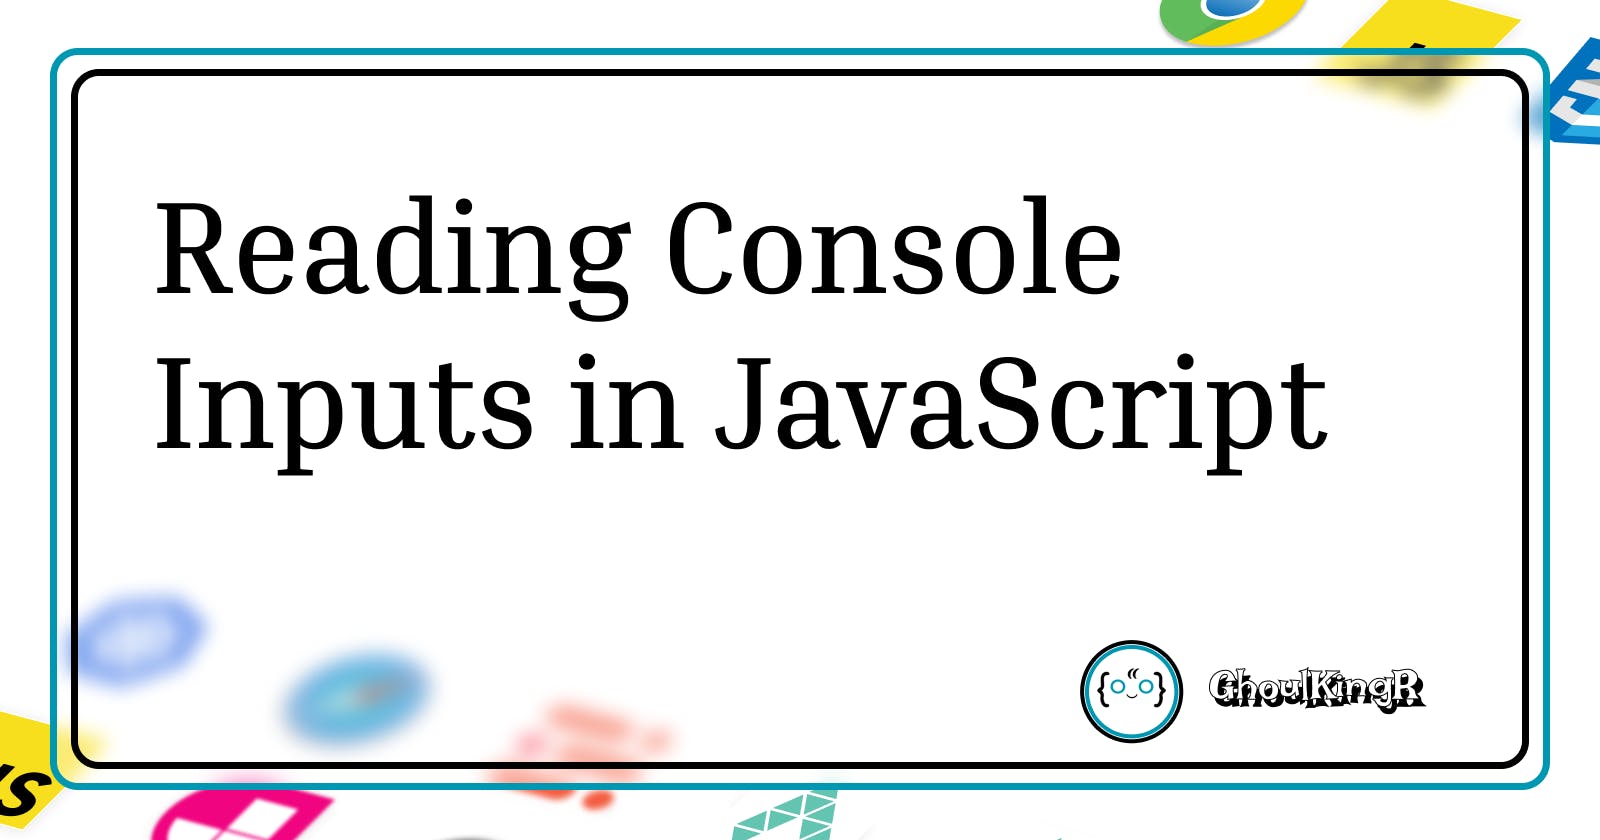 Reading Console Inputs in JavaScript